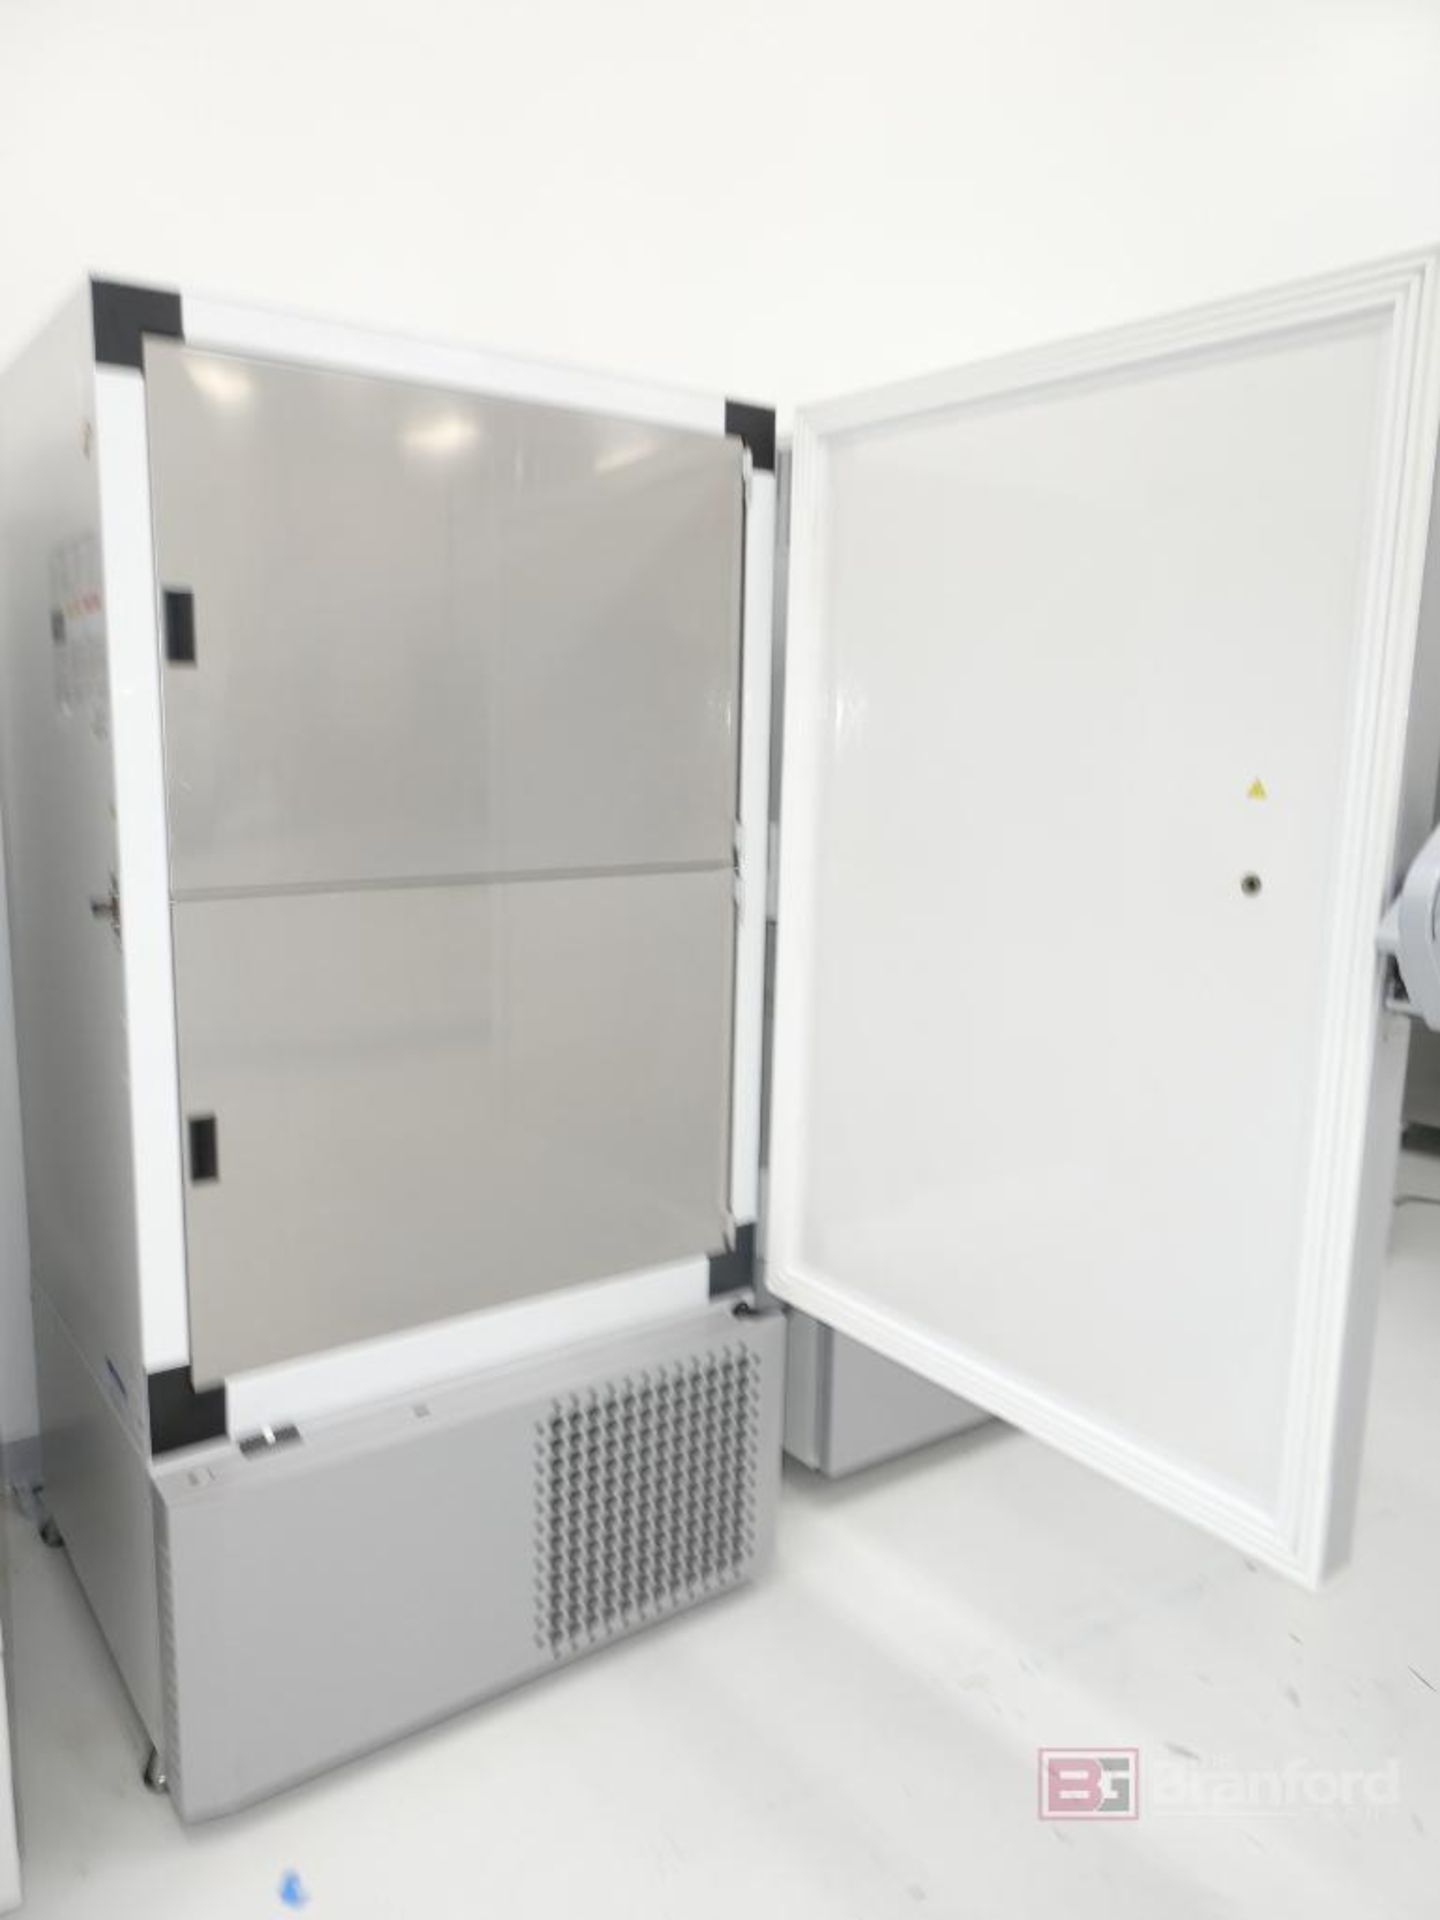 ThermoFisher Scientific Model TSX60086A, TSX Series Ultra-Low Single Door Freezer - Image 3 of 7